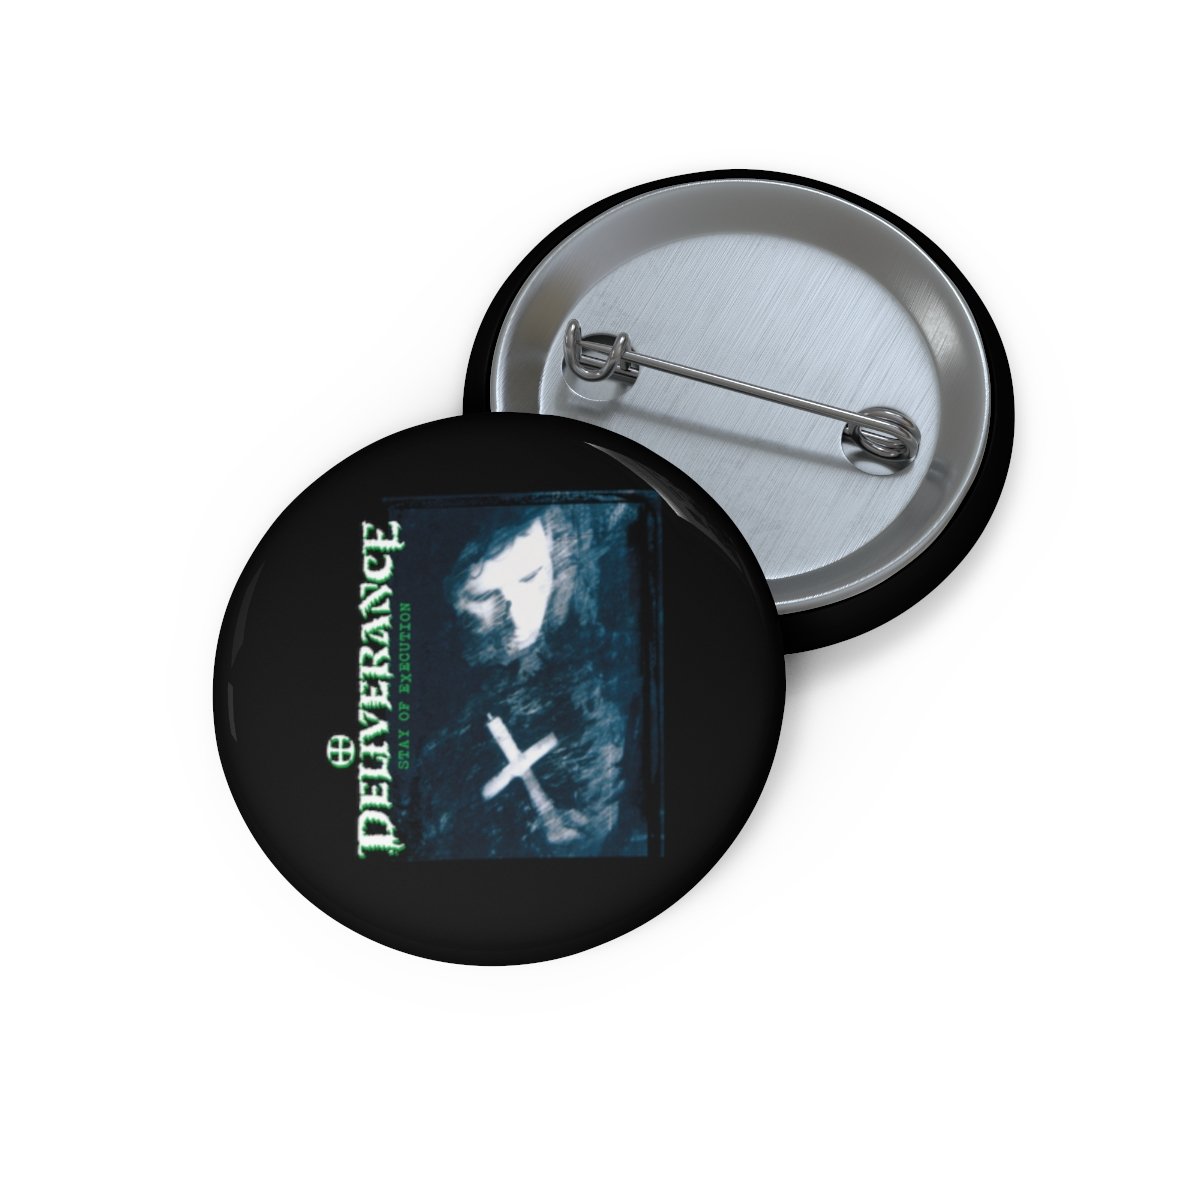 Deliverance – Stay of Execution (Dark) Pin Buttons